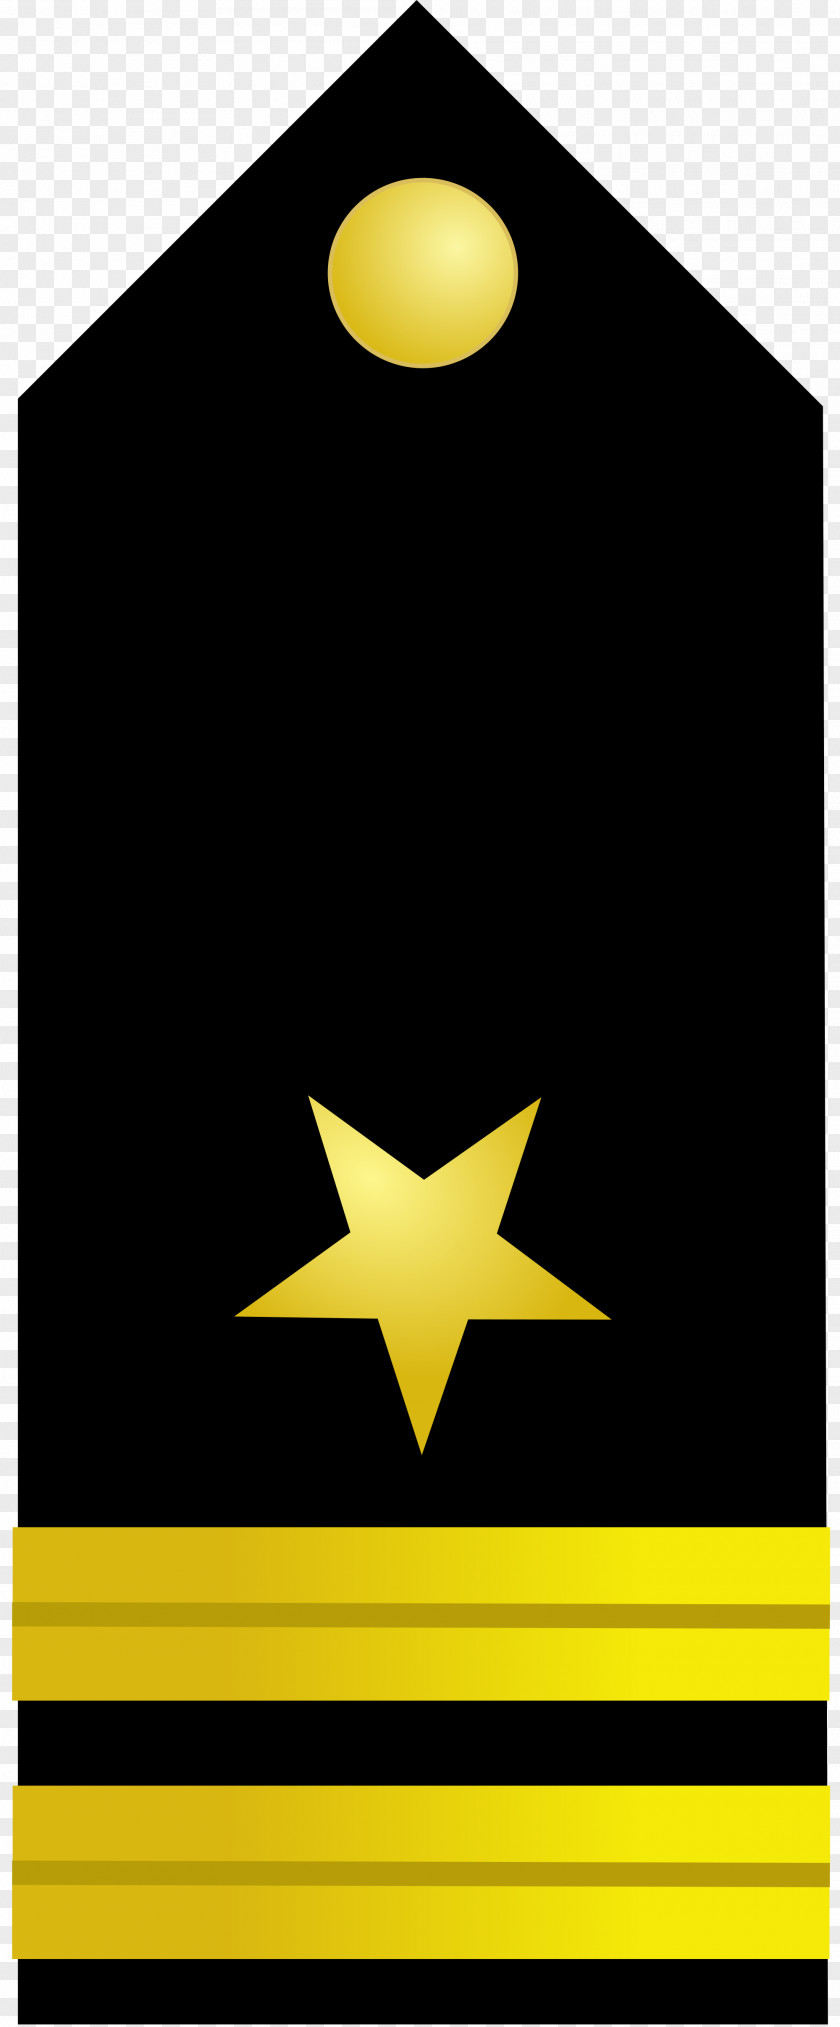 Military United States Navy Officer Rank Insignia Army PNG